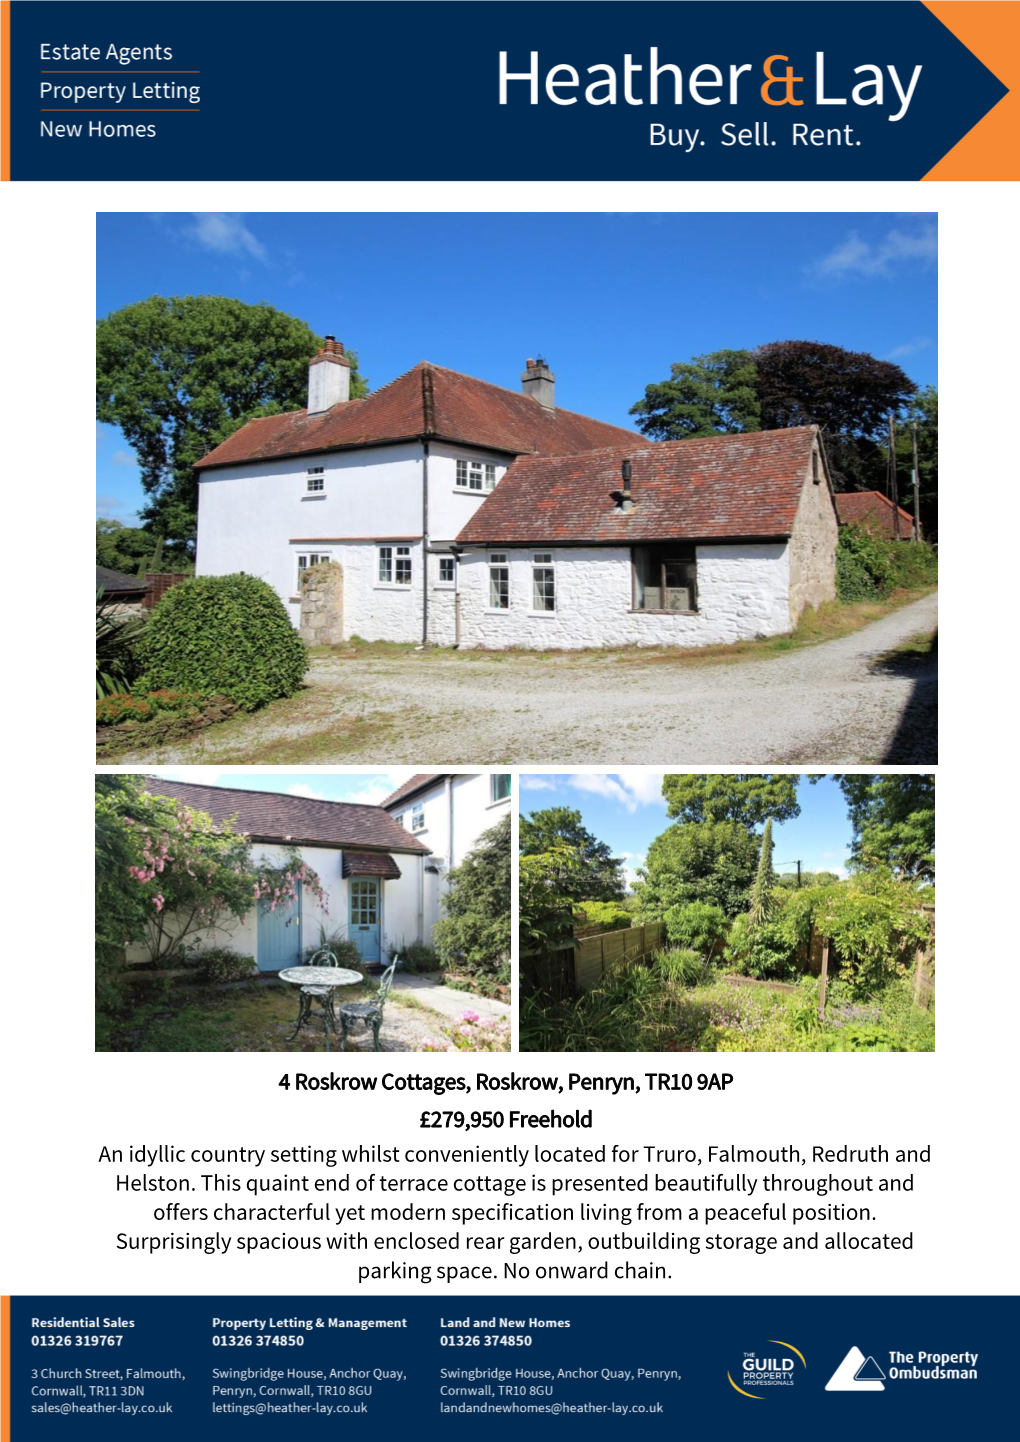 4 Roskrow Cottages, Roskrow, Penryn, TR10 9AP £279,950 Freehold an Idyllic Country Setting Whilst Conveniently Located for Truro, Falmouth, Redruth and Helston